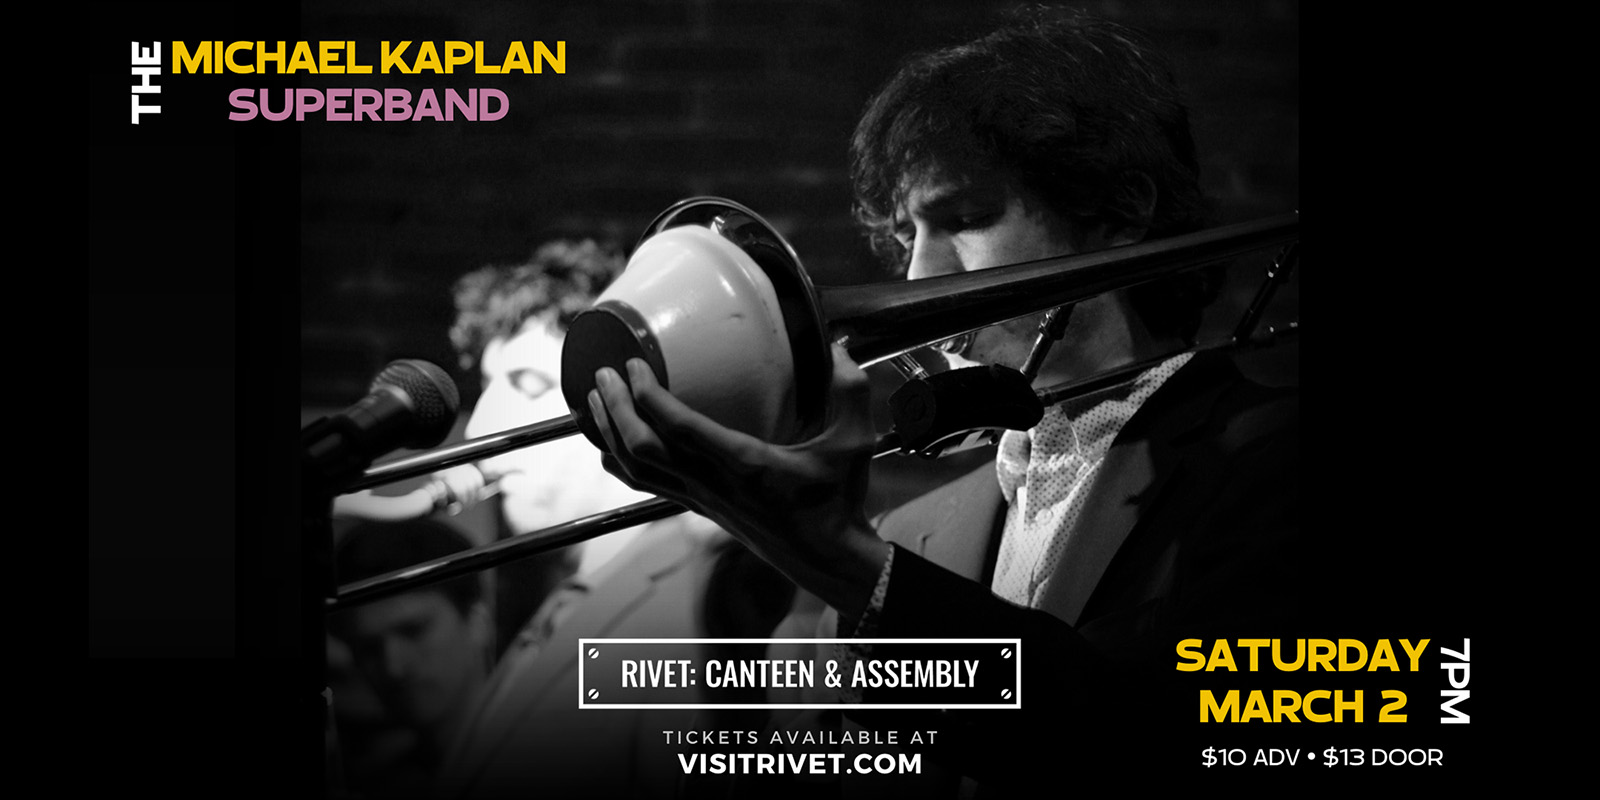 The Michael Kaplan Superband performing live at Rivet: Canteen & Assembly on Saturday, March 2nd, 2024. Be there!